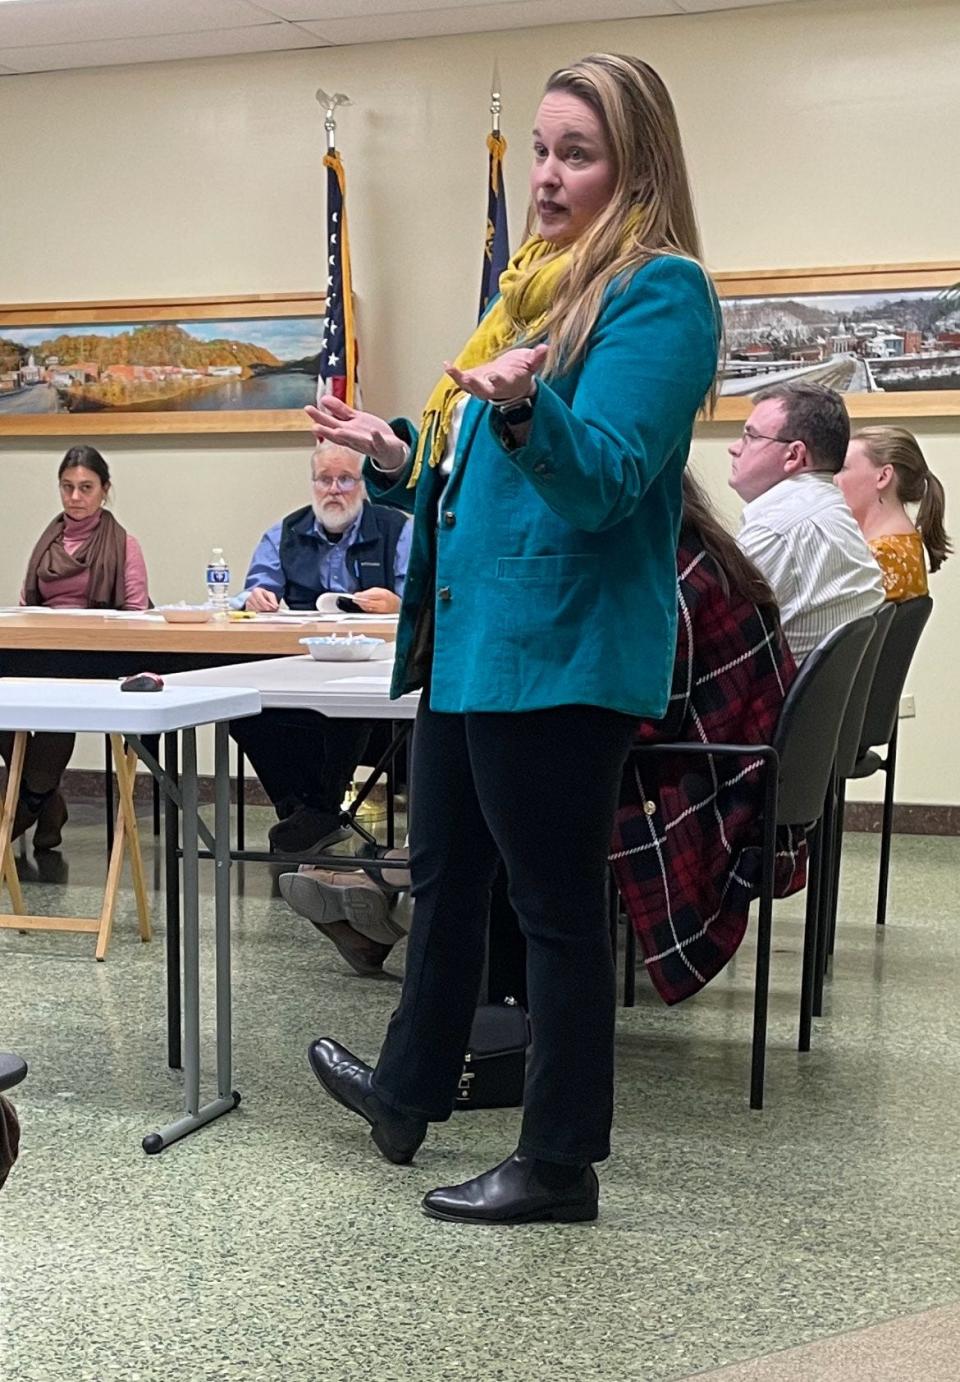 Michelle Morrison, who lives adjacent to the campground project proposed for Redmon Road, said she felt the Marshall Board of Adjustment should reject issuing a special use permit to the applicant proposing the campground.